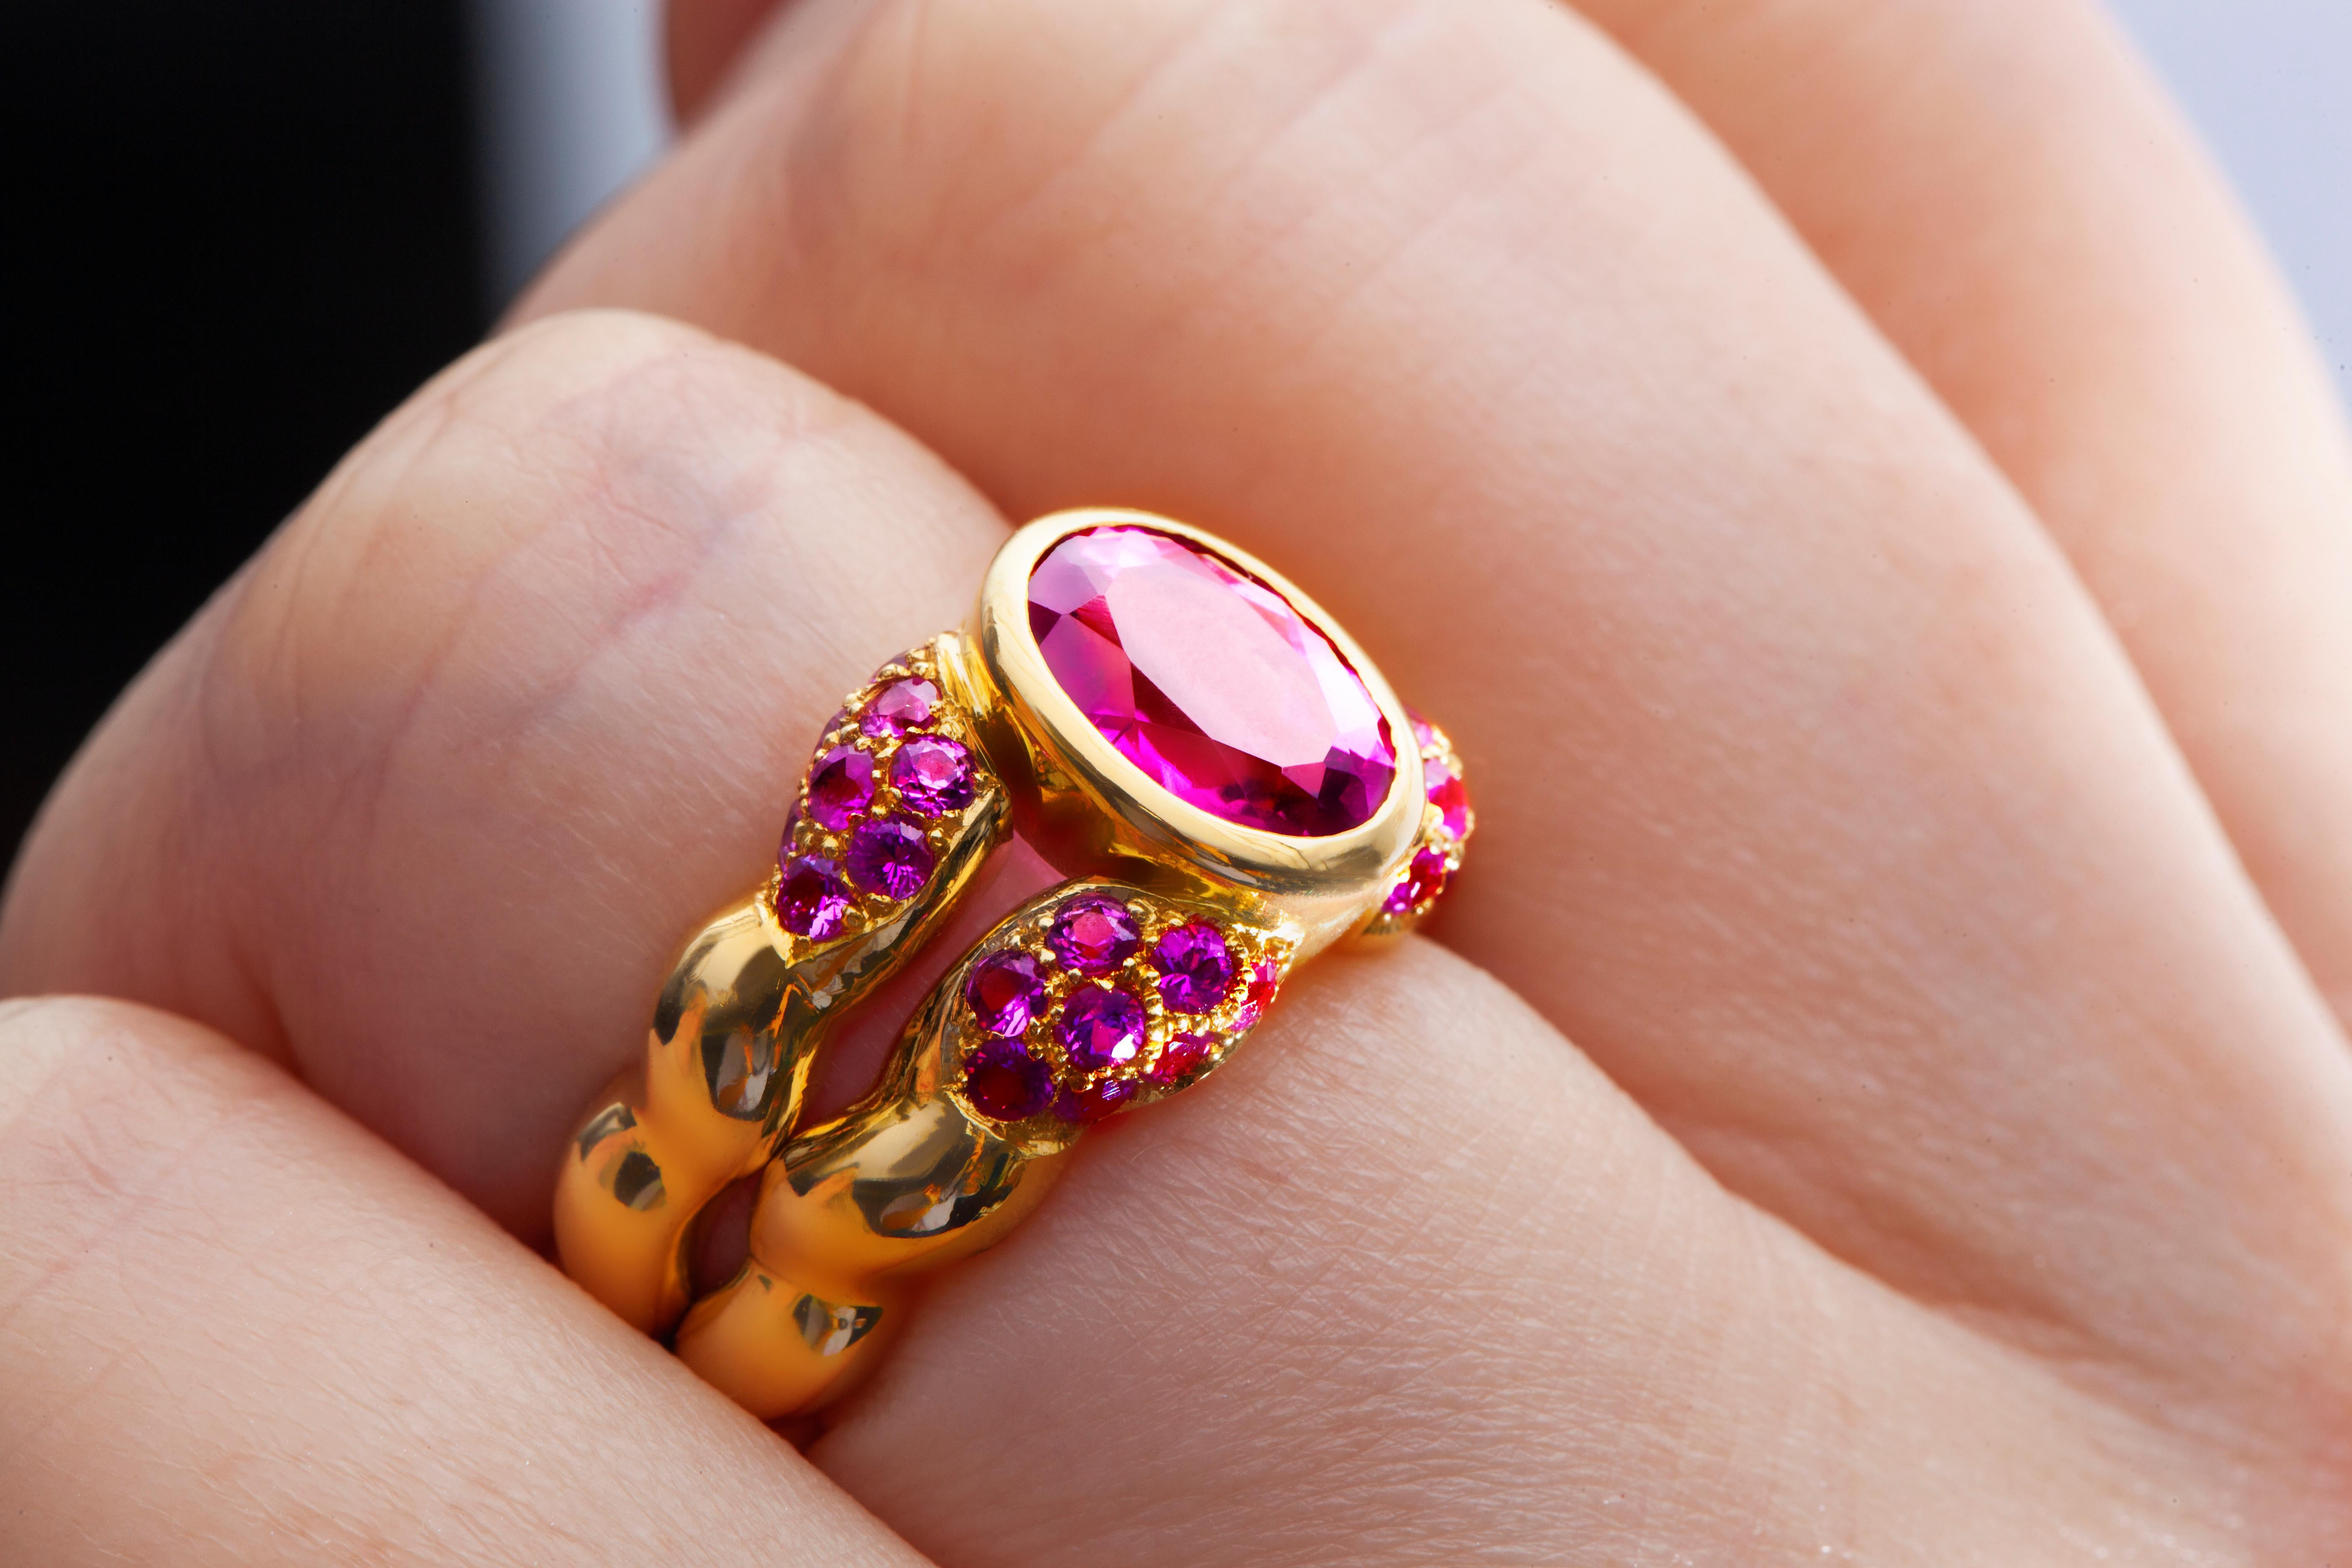 Pink sapphire ring with an center oval pink sapphire weighing 1.76cts surrounded by 32 round pink sapphires weighing 1.02cts total and handmade in 18k yellow gold.